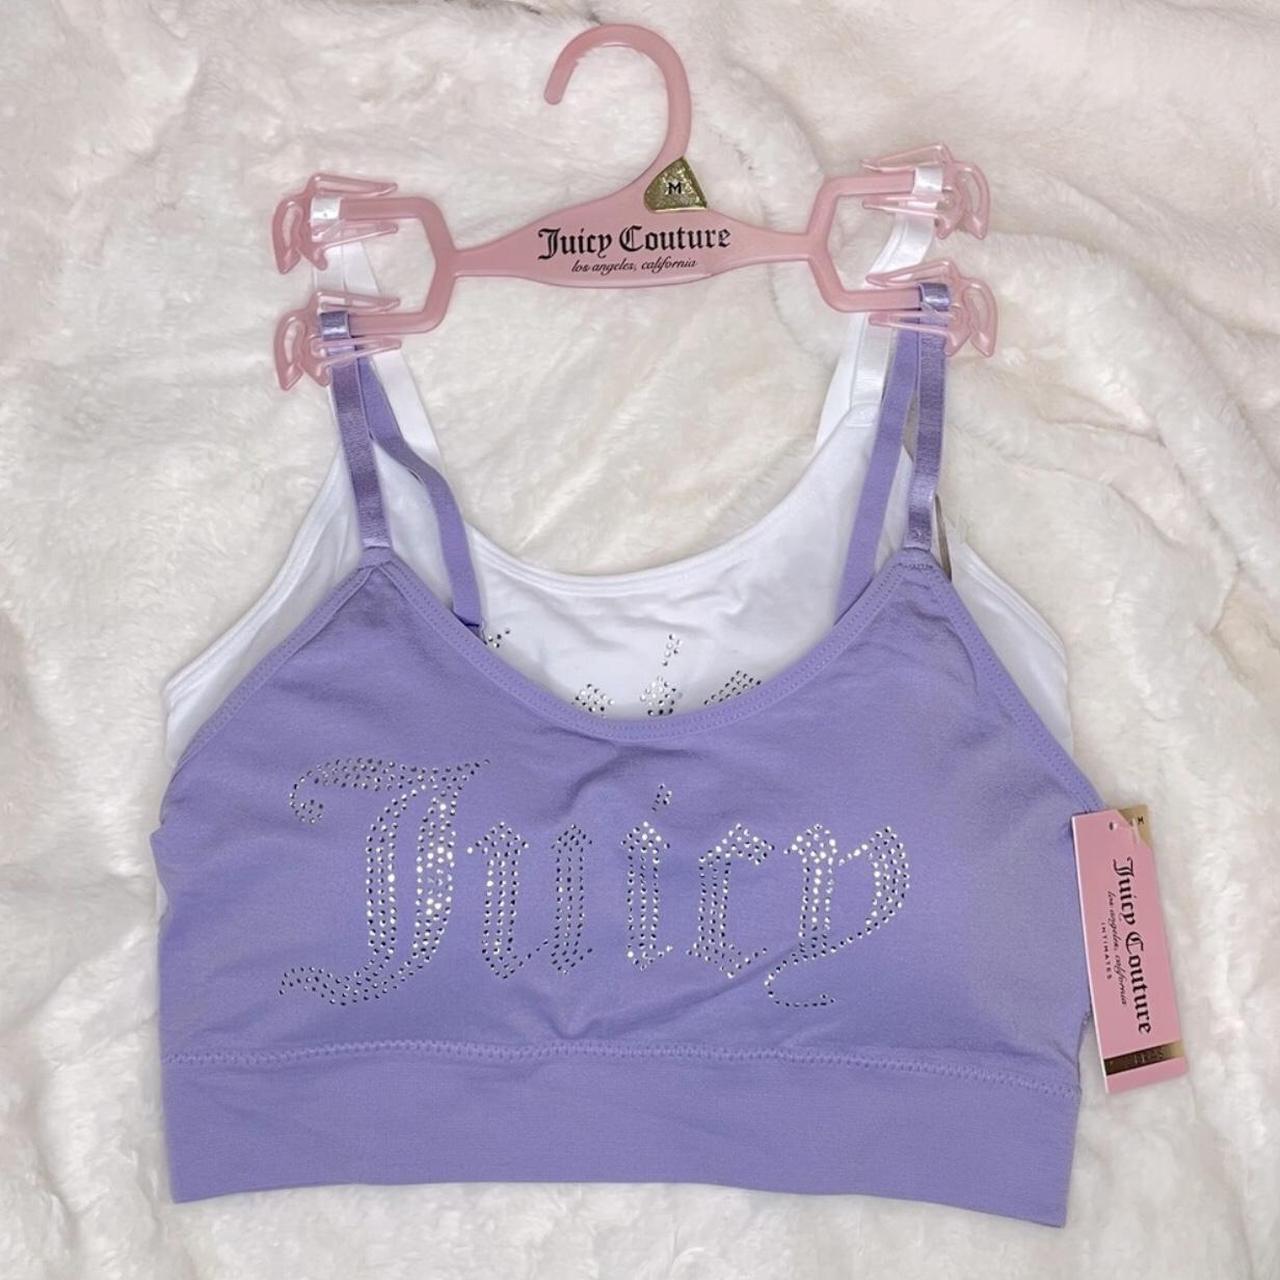 Juicy Couture, Tops, Juicy Couture Y2k Rhinestone Bedazzled Sports Bra